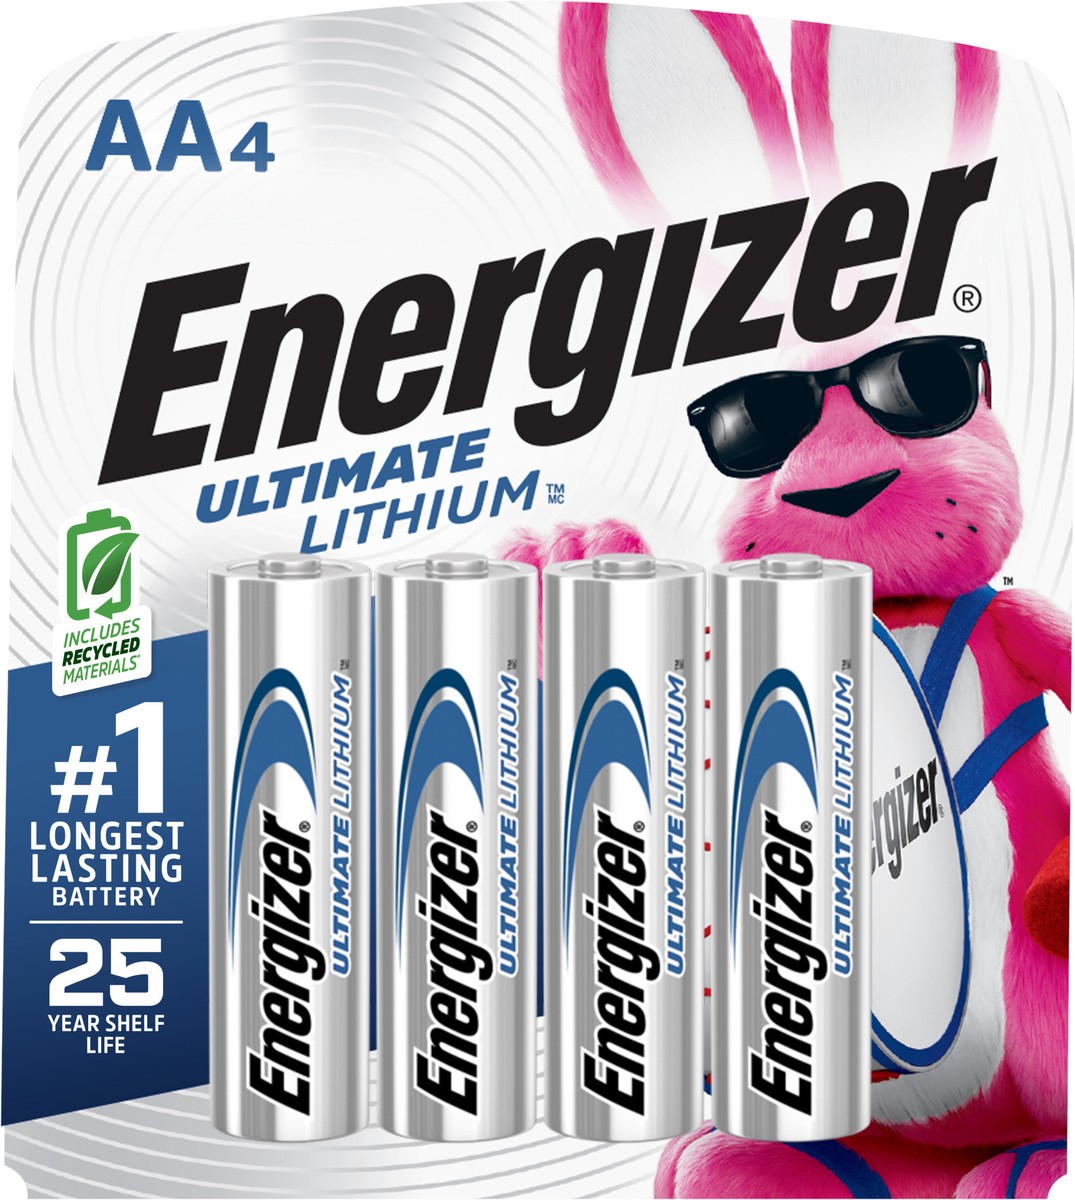 slide 6 of 6, Energizer Ultimate Lithium AA Batteries, 4 ct